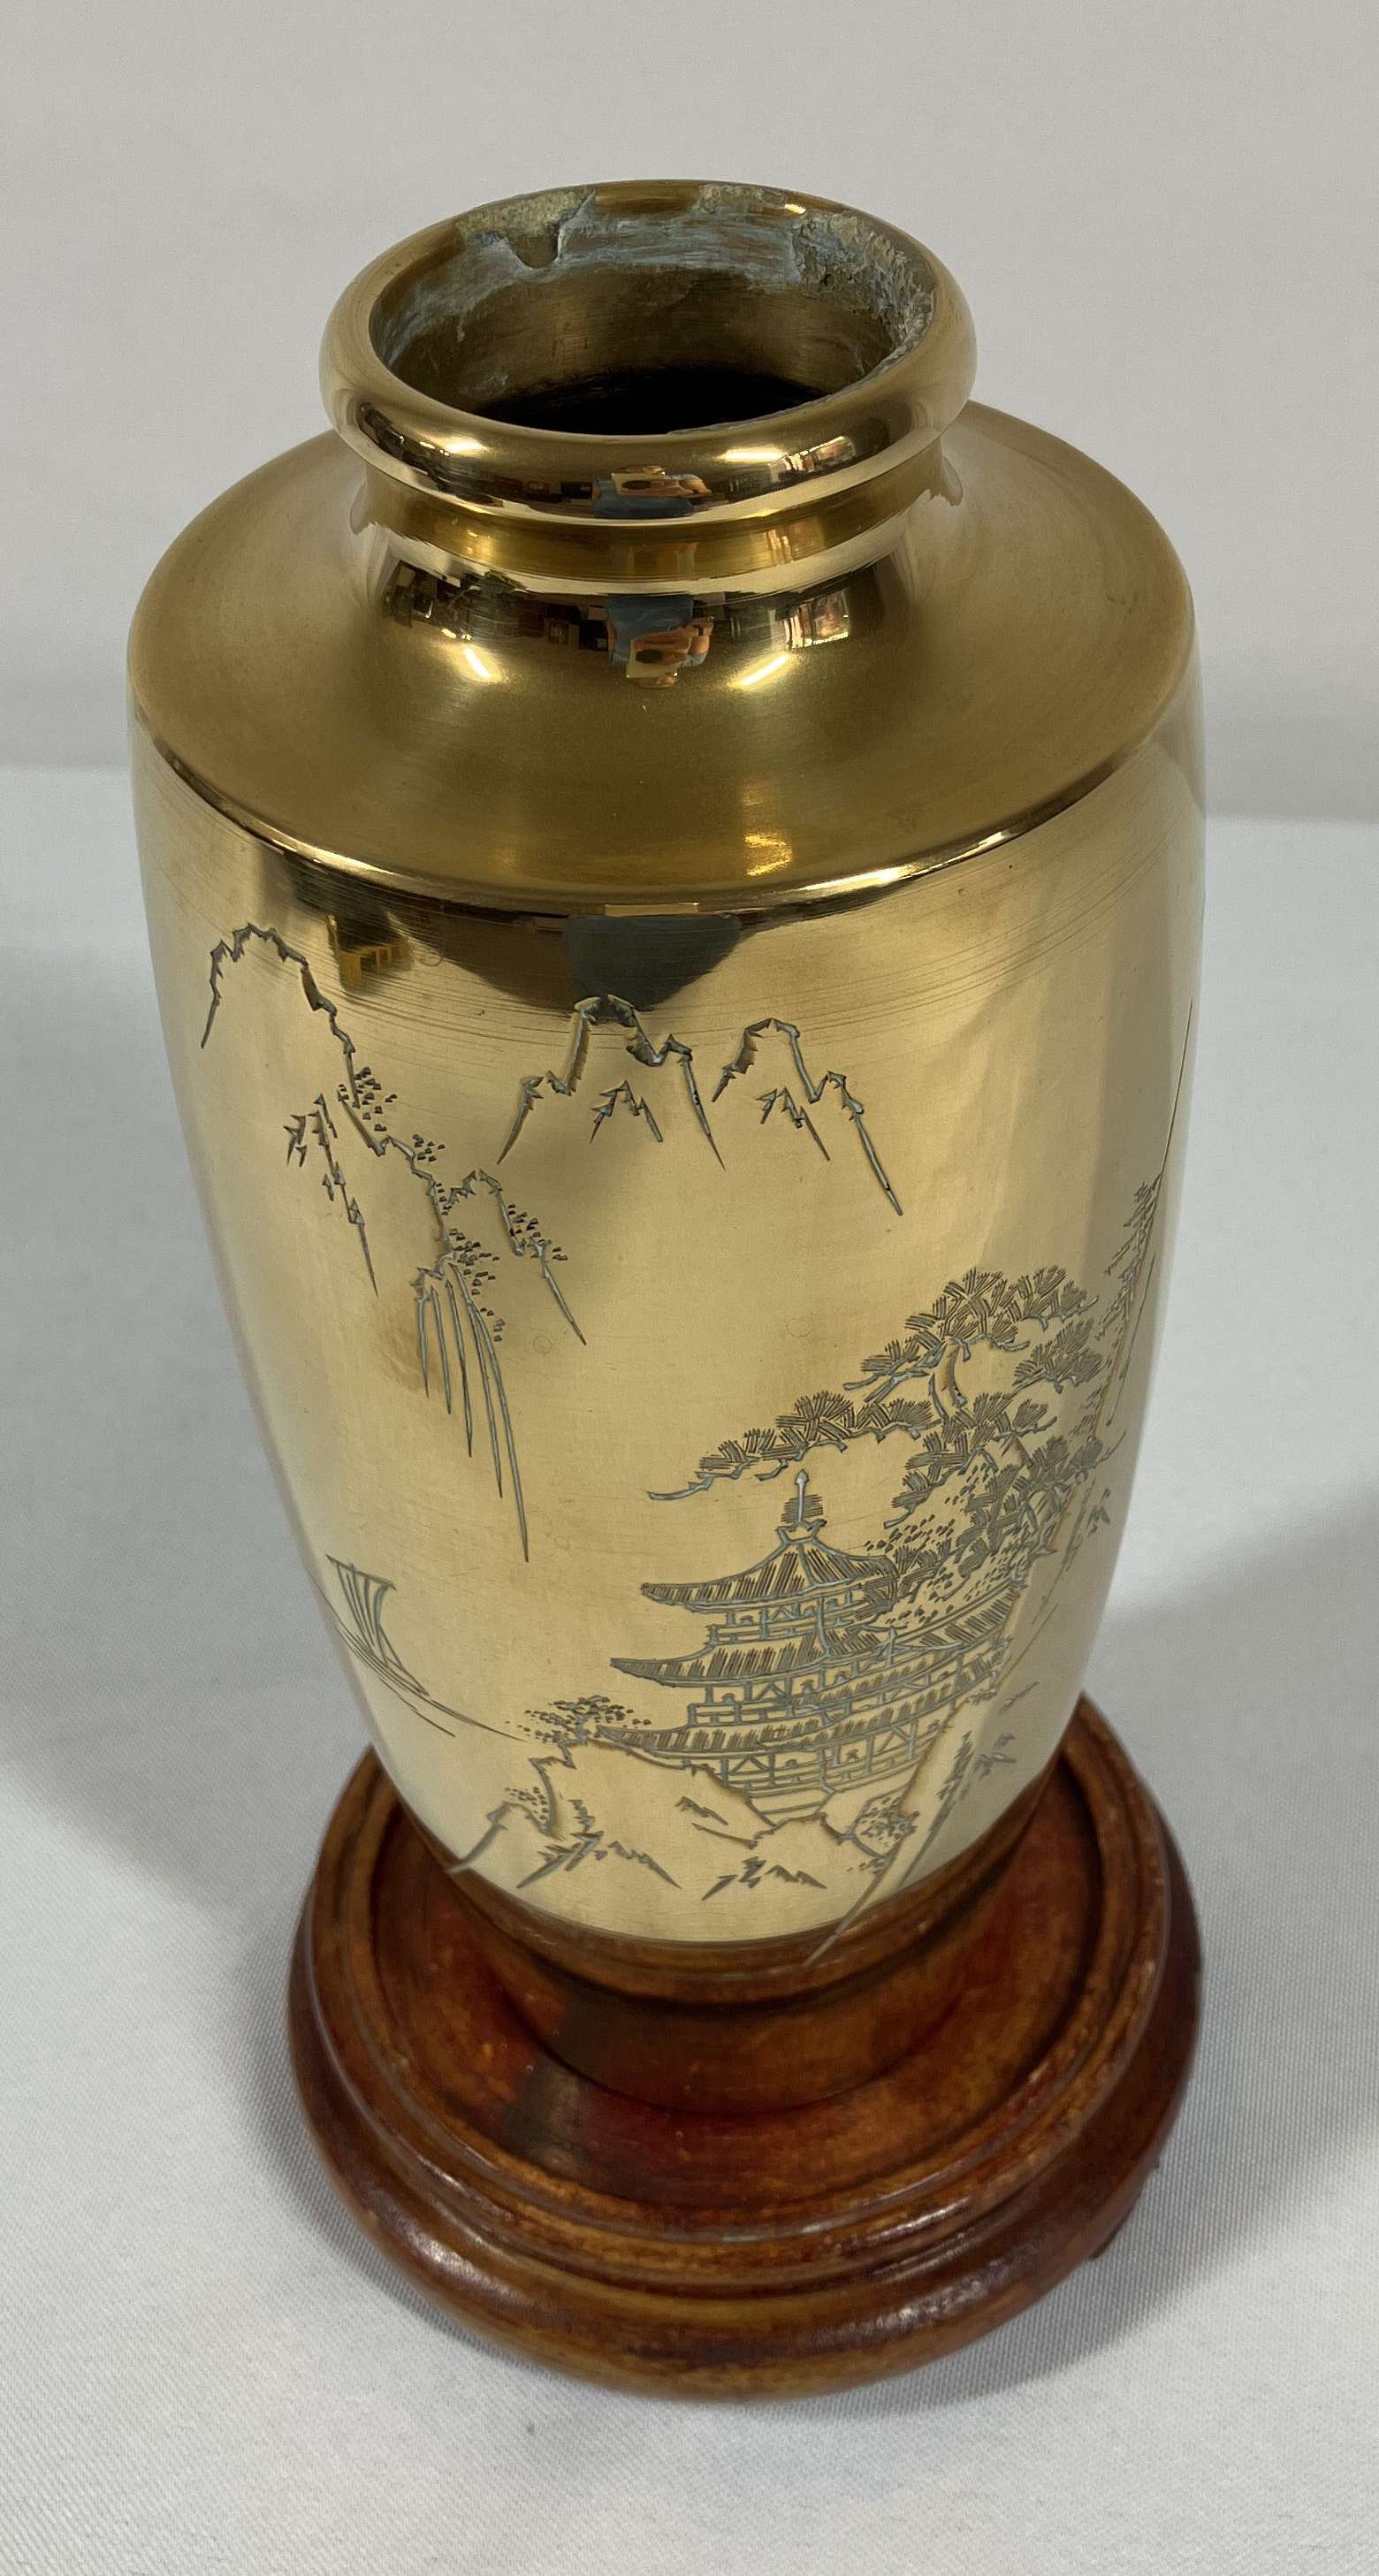 Brass Vase 14 Etched Decorative Brass Flower Vase Made in India -   Canada